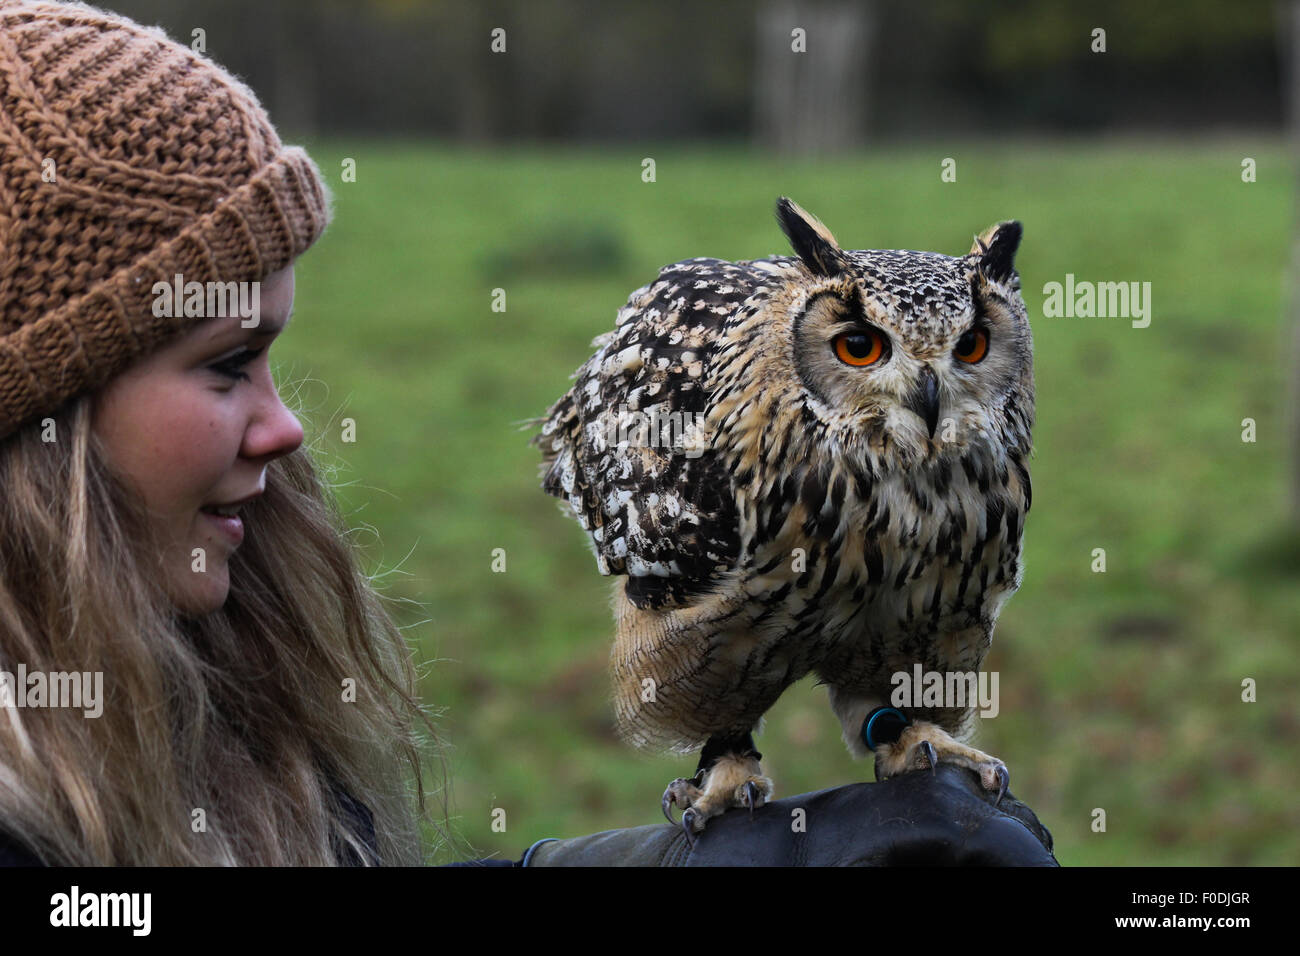 A young woman smiles at a Bengal eagle-owl perched on her falconers glove Stock Photo